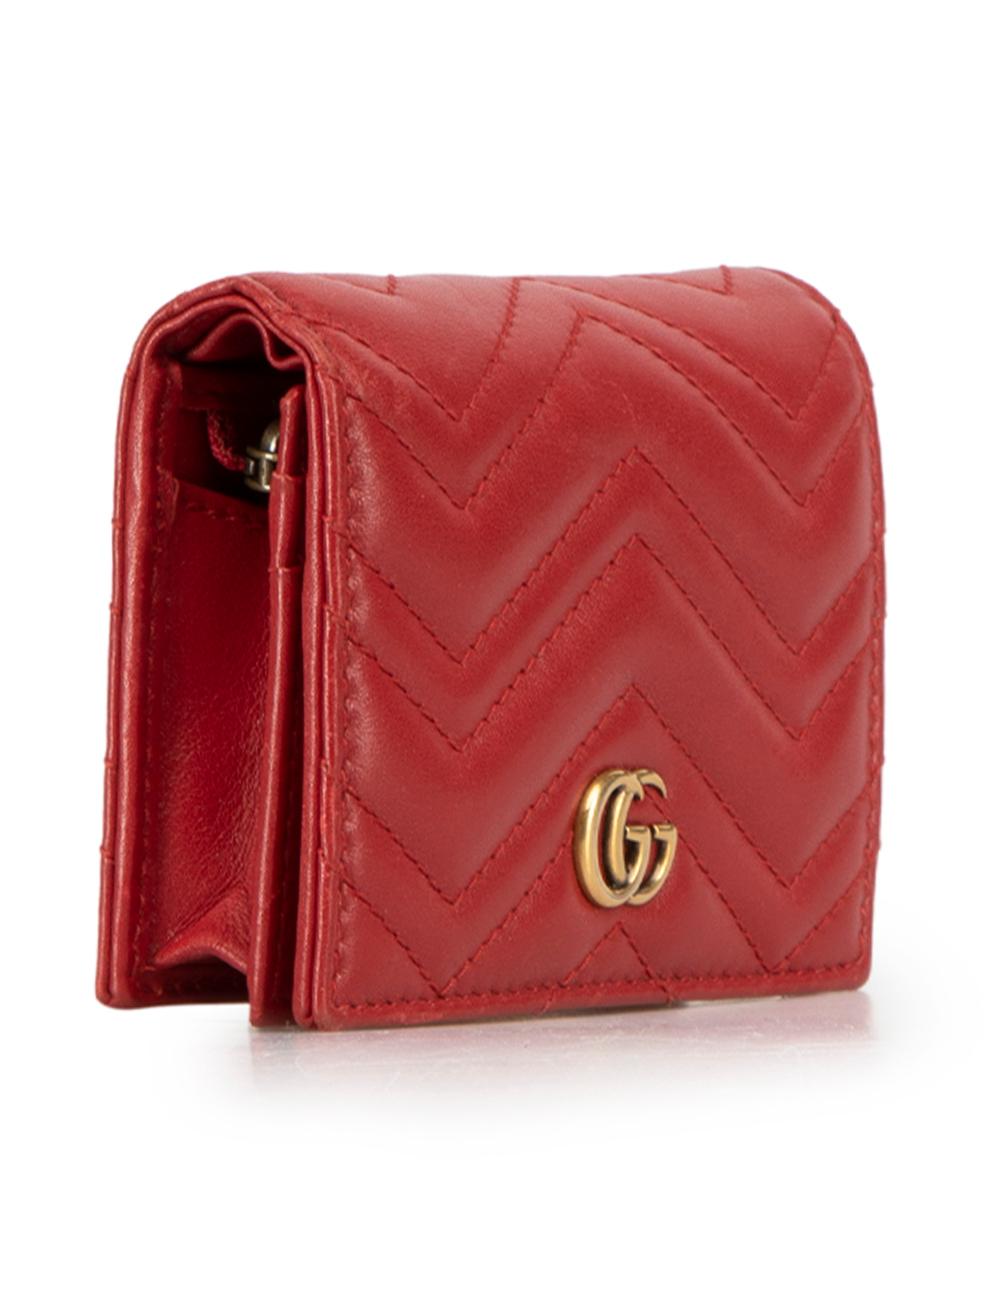 CONDITION is Very good. Minimal wear to purse is evident. Minimal wear to the edges with light scuffing on this used Gucci designer resale item.



Details


Red

Leather

Wallet

Chevron pattern

Gold tone GG logo

Snap button opening

Notes